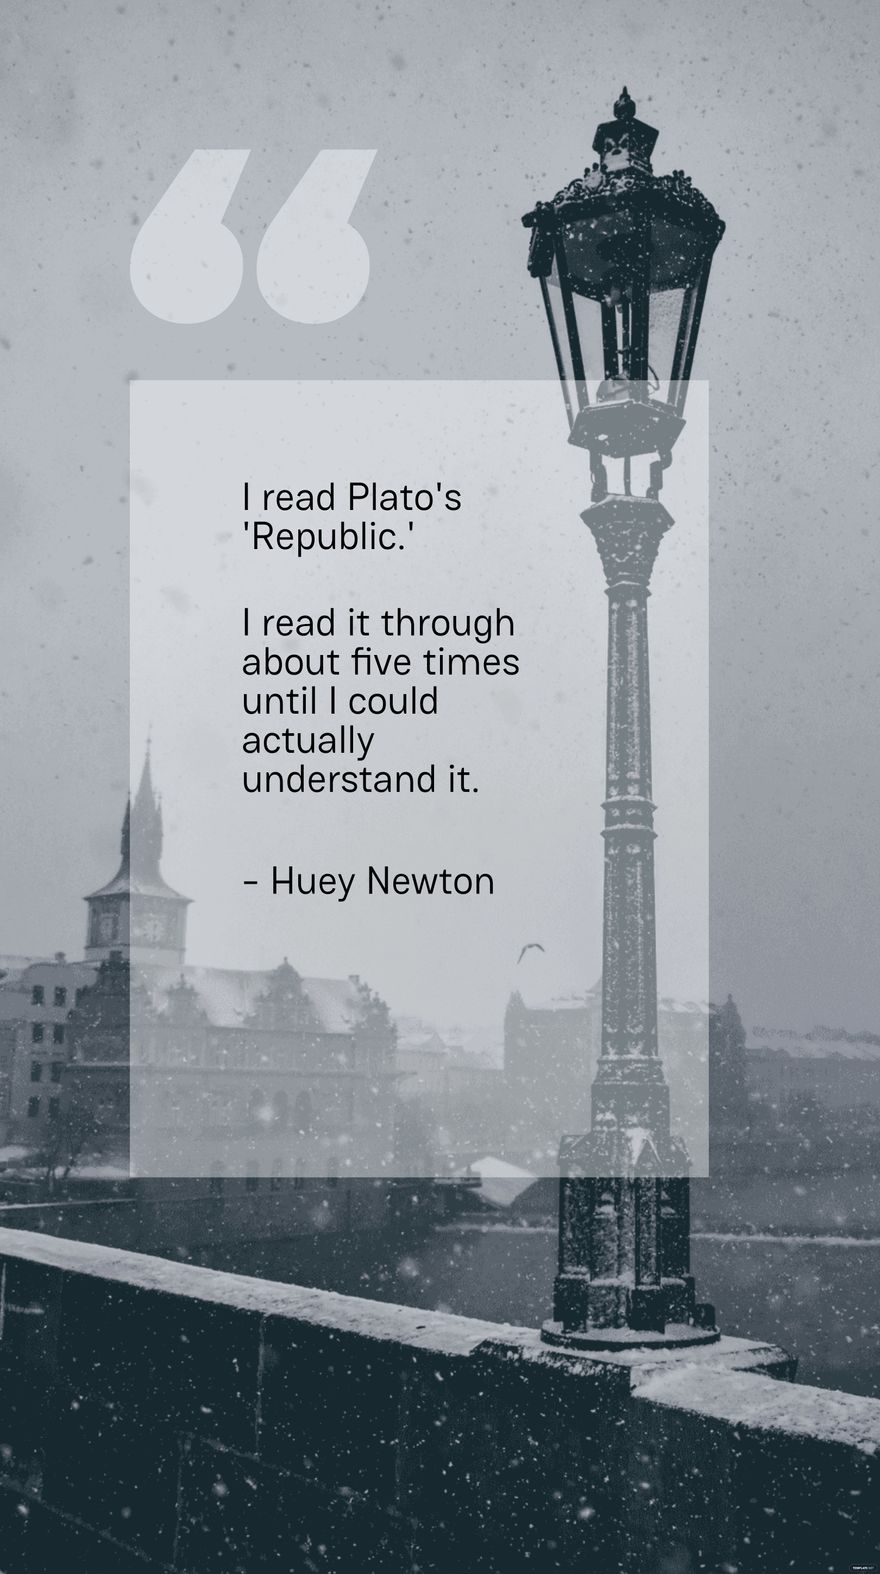 I read Plato's 'Republic.' I read it through about five times until I could actually understand it. - Huey Newton